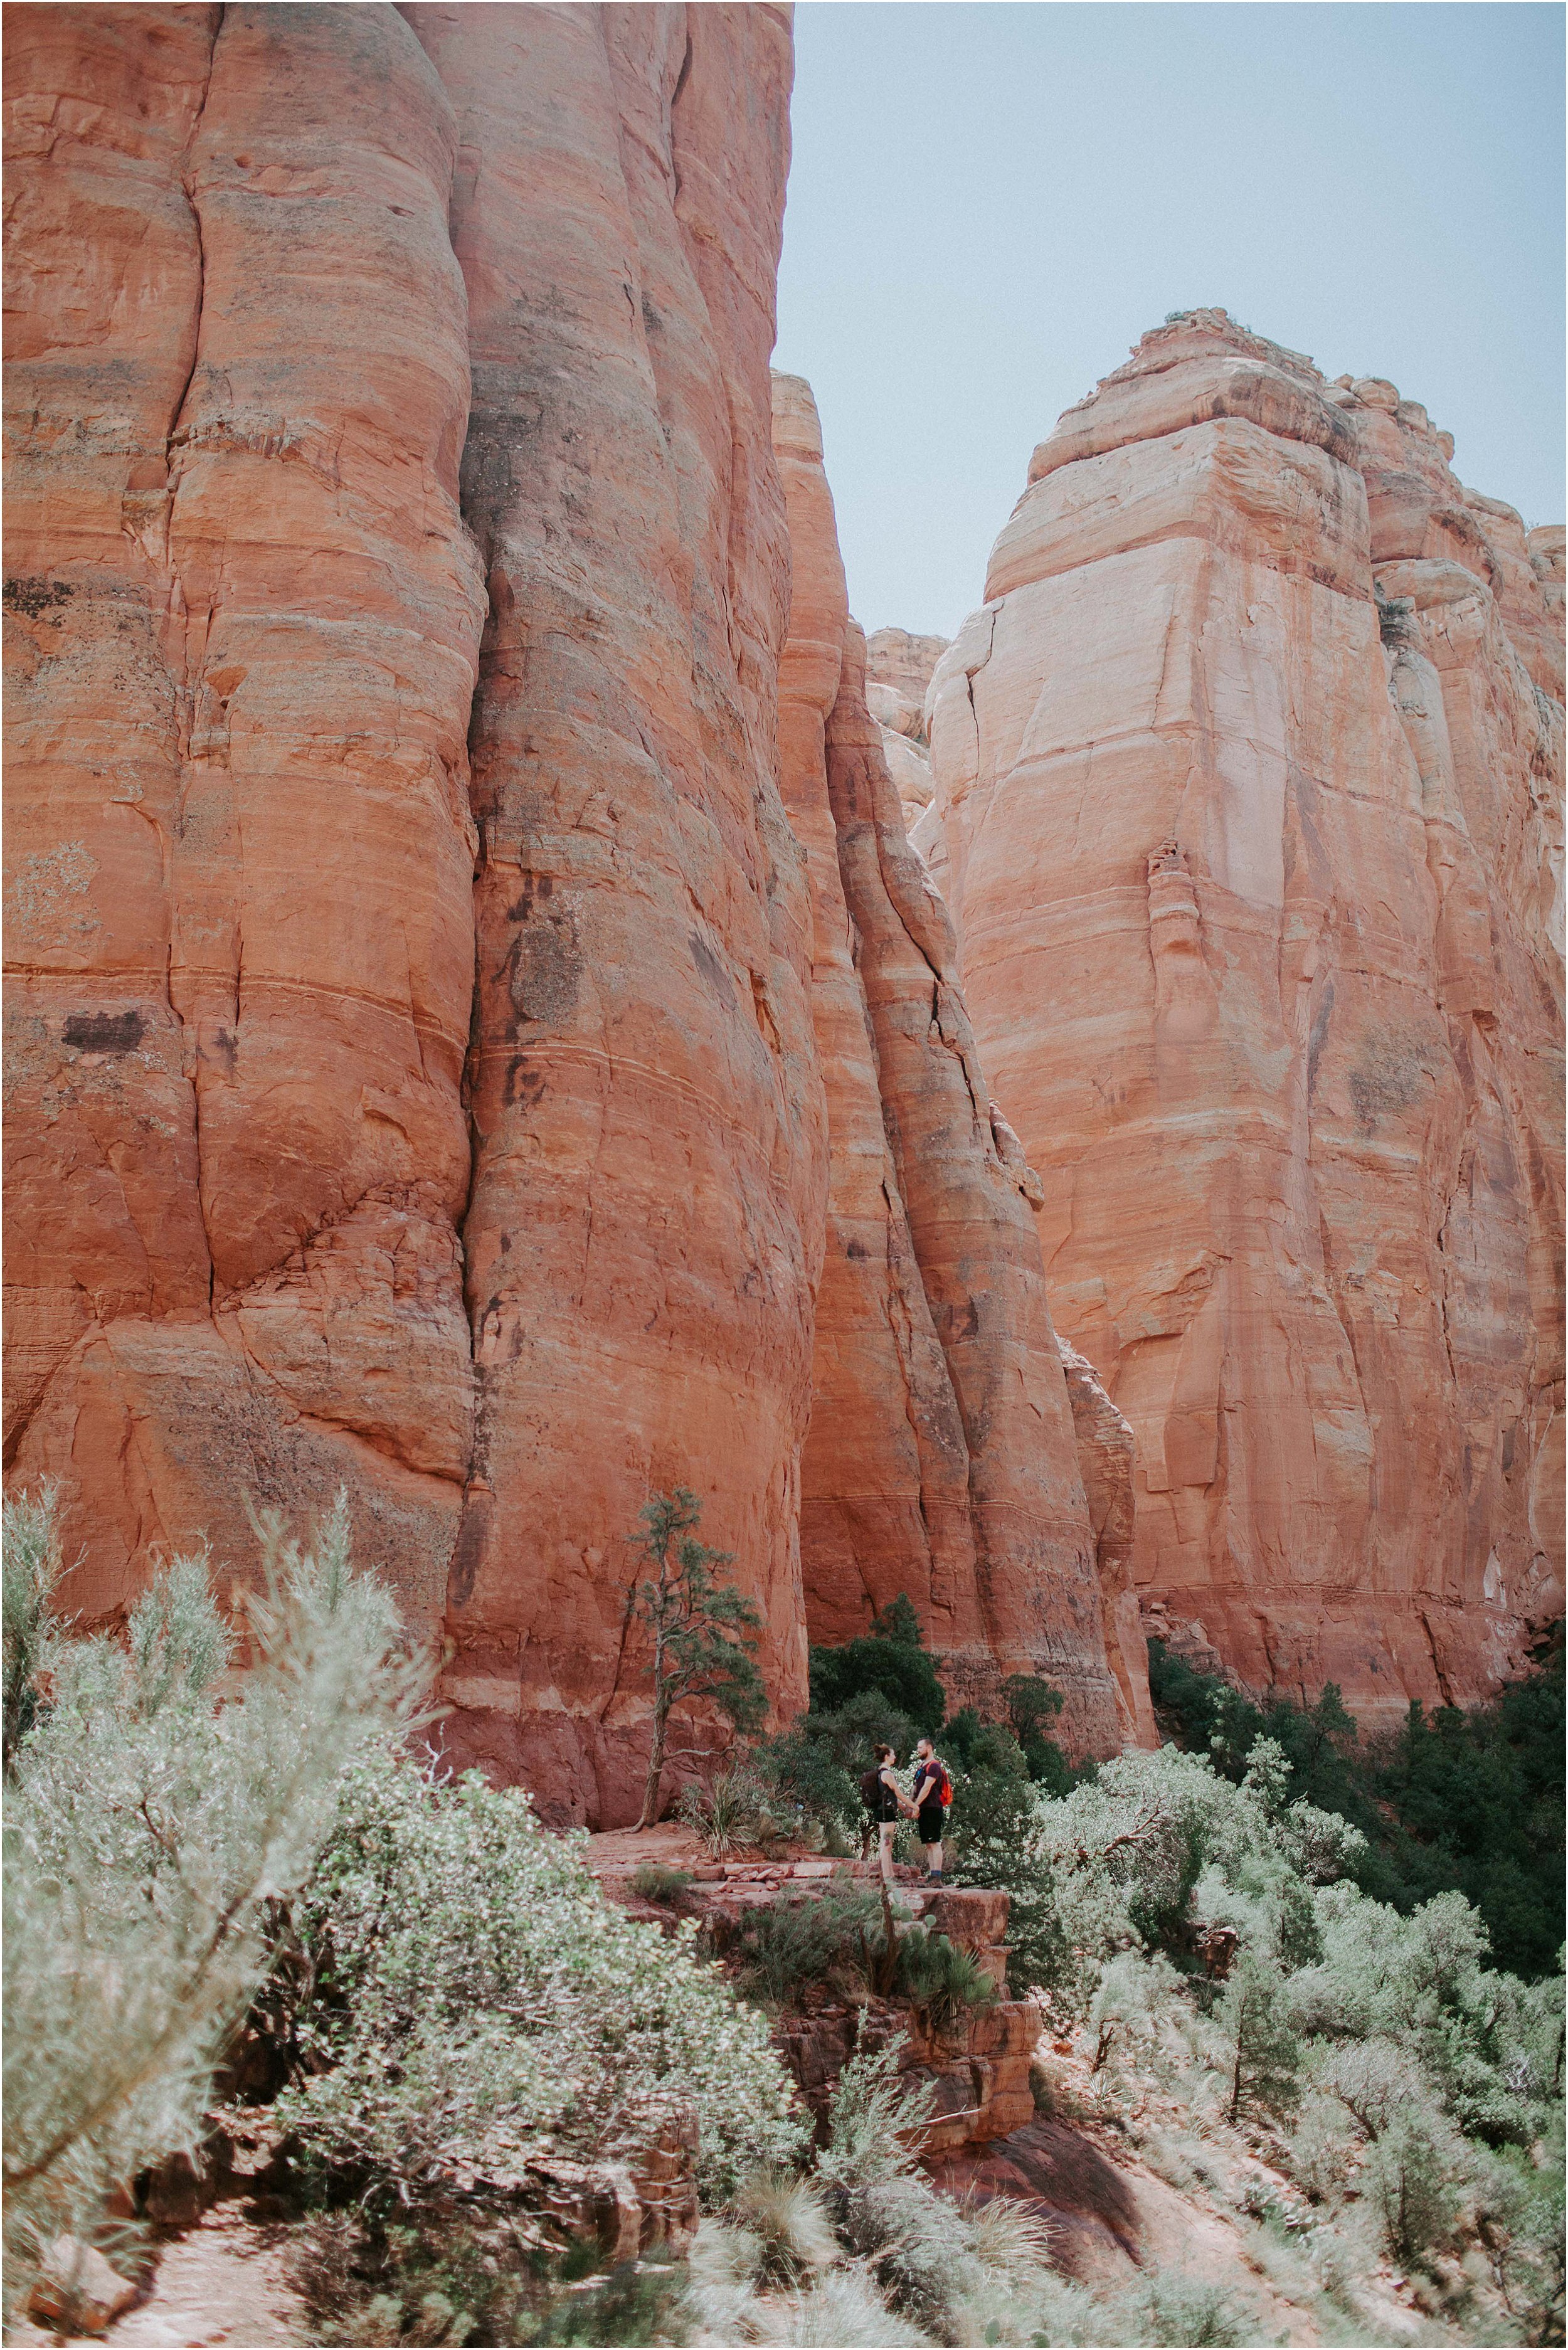  A couple is far off in the distance holding hands and completely dwarfed by huge tall red sandstone cliffs in the Sedona dessert in Arizona.  